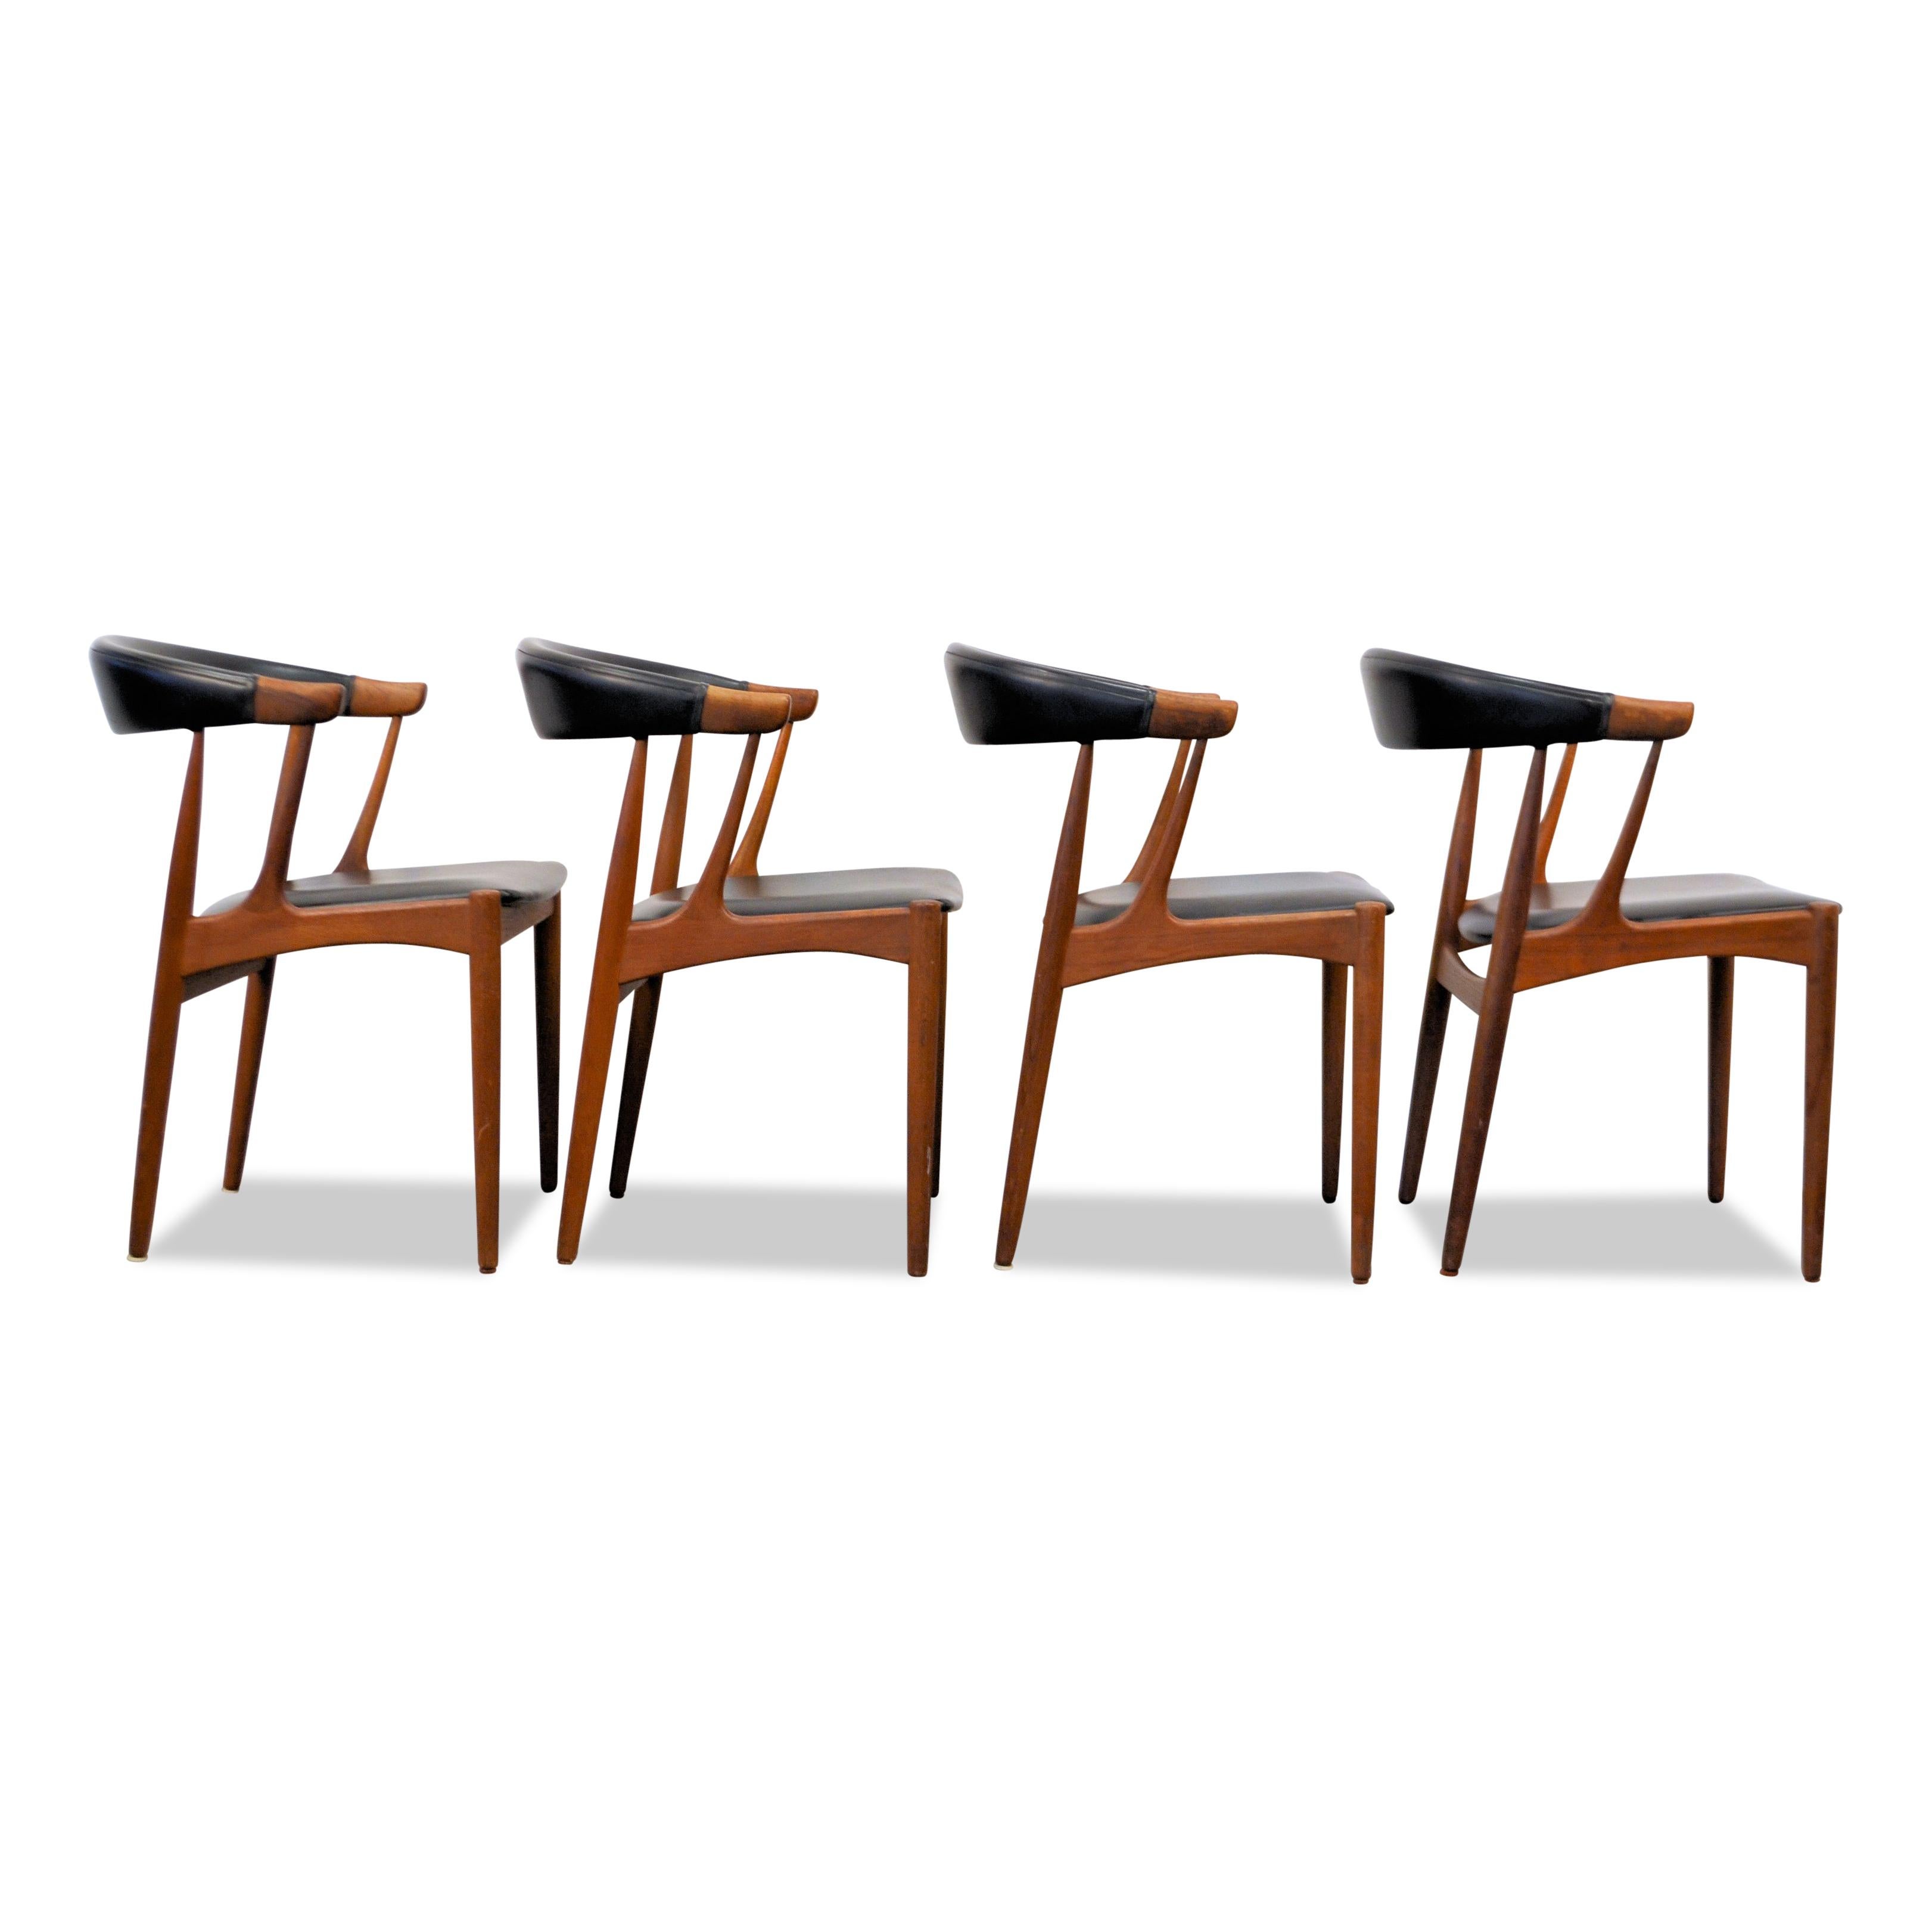 Set of four vintage dining chairs designed in the 1960s by worldwide known and appreciated furniture designer Johannes Andersen. His designs are considered high end Danish modern design. These chairs feature Andersen’s characteristic organic curved